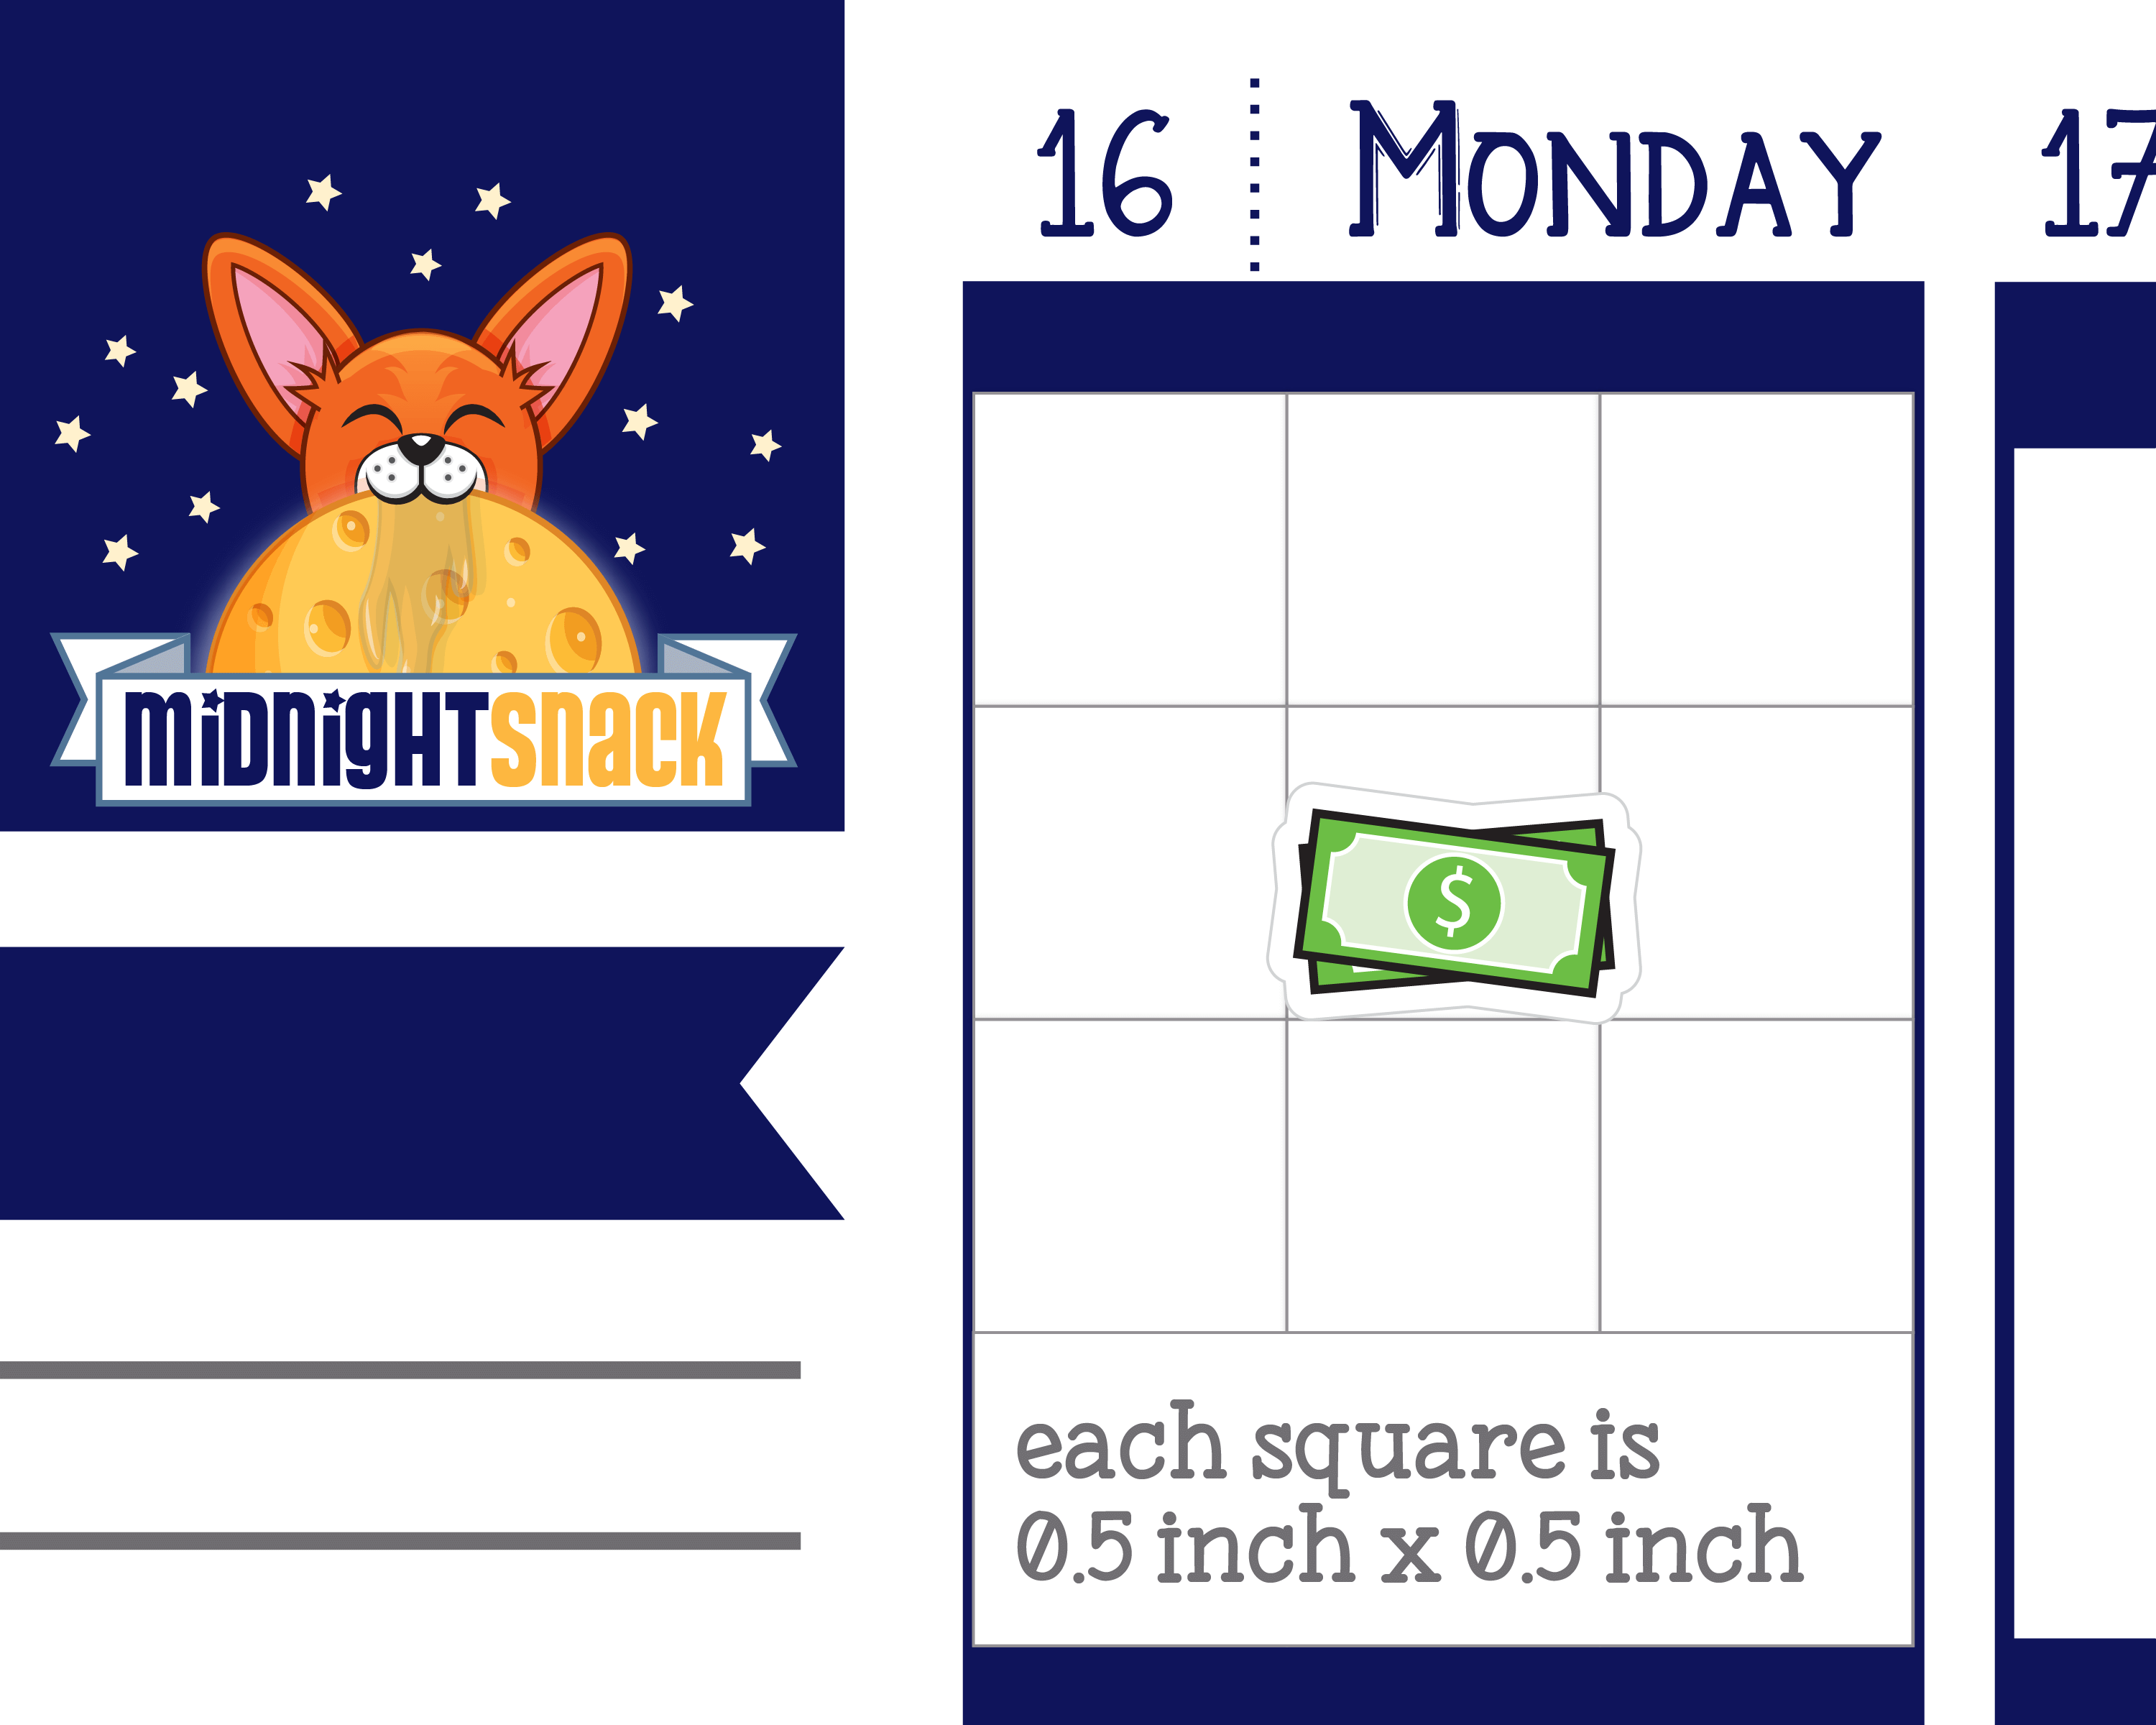 Money Icon: Pay Day Planner Stickers: Midnight Snack Planner